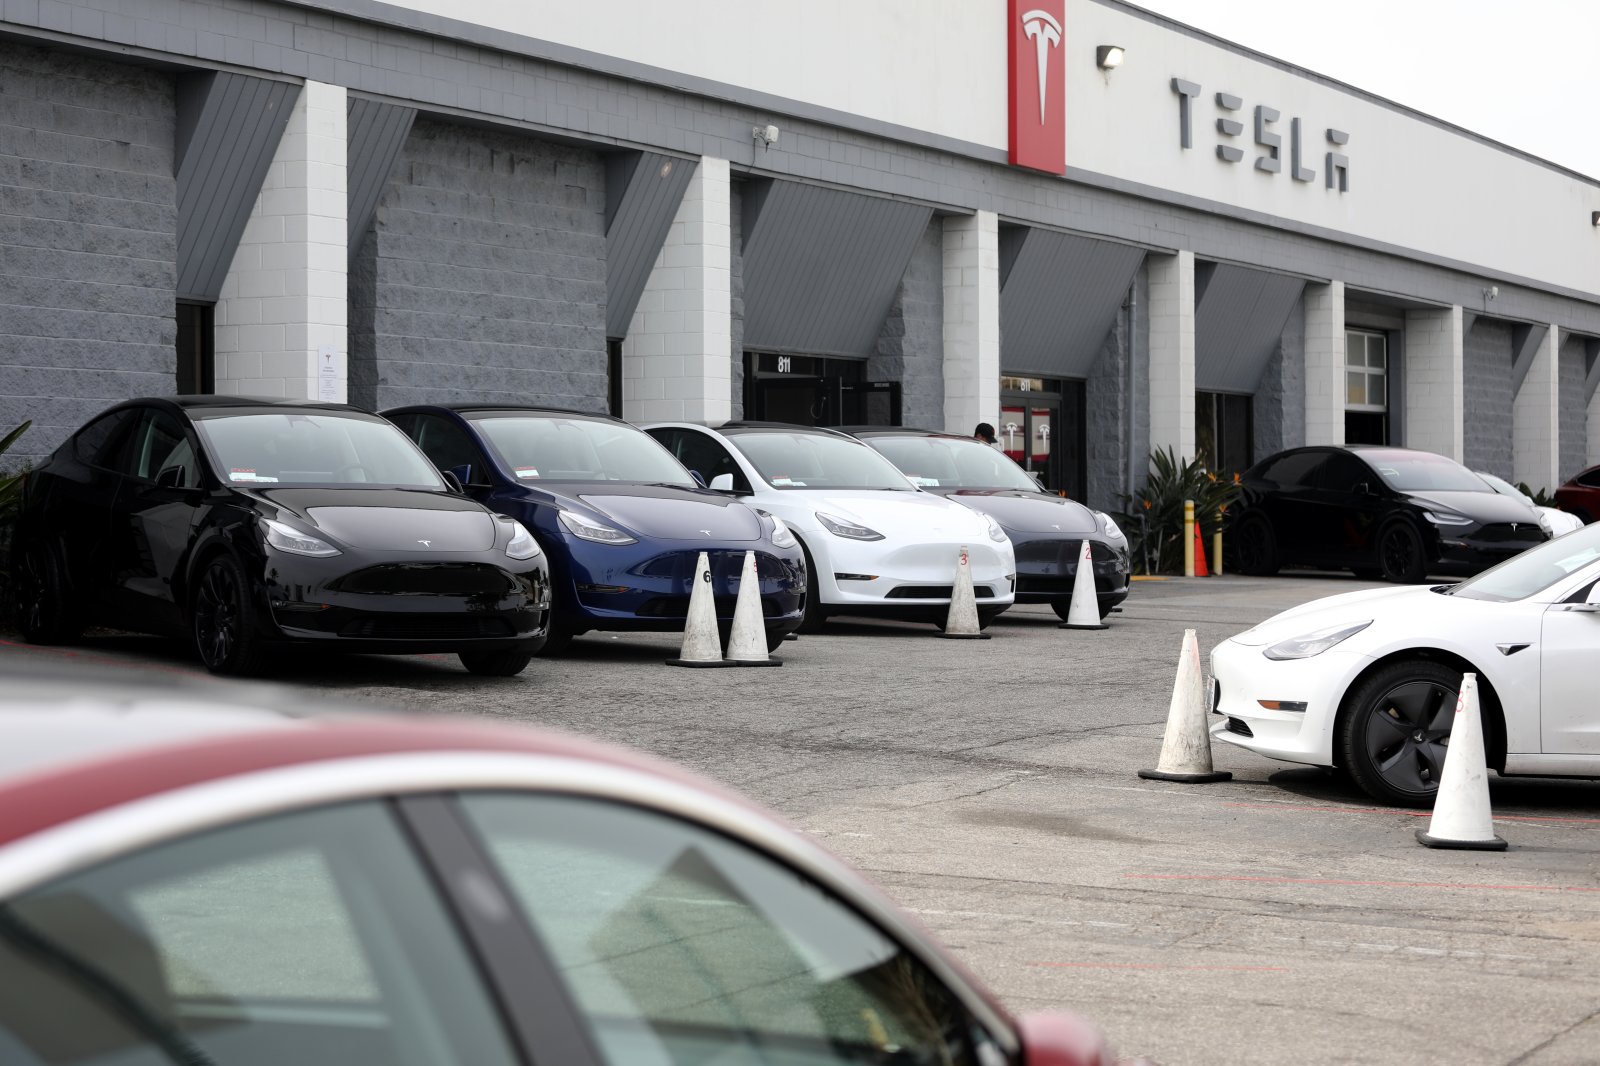 Tesla Recalls More Than 300,000 Vehicles Over ‘Self-Driving’ Safety Concerns